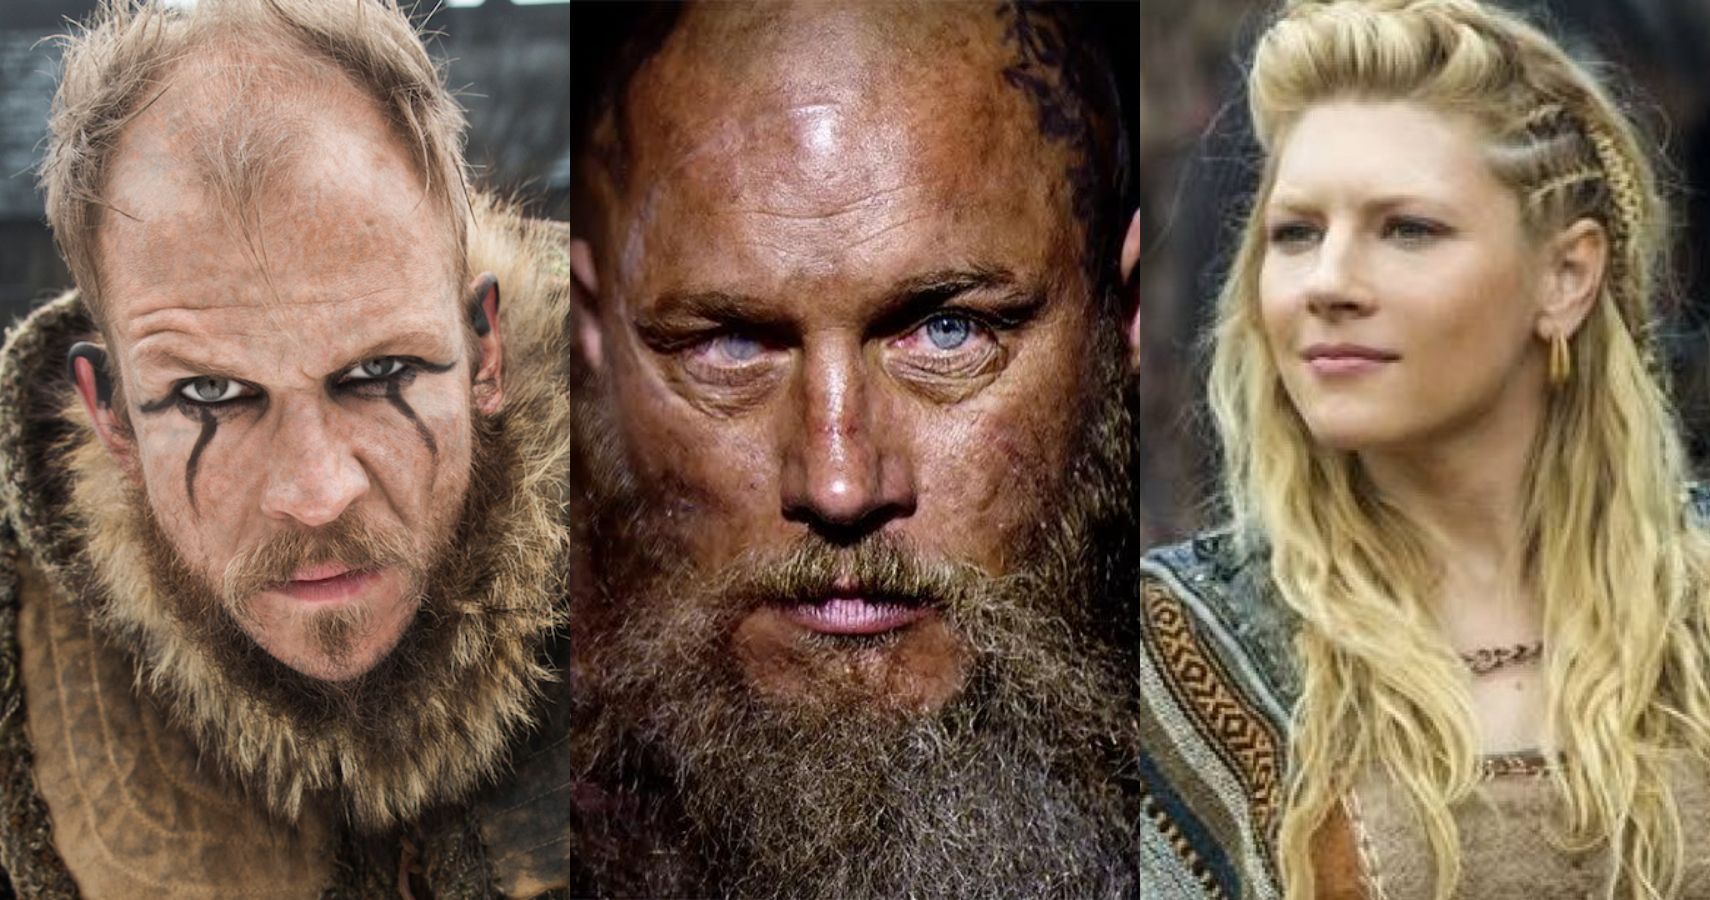 Turns Out The Real Inspiration For Vikings' Lagertha Is Even